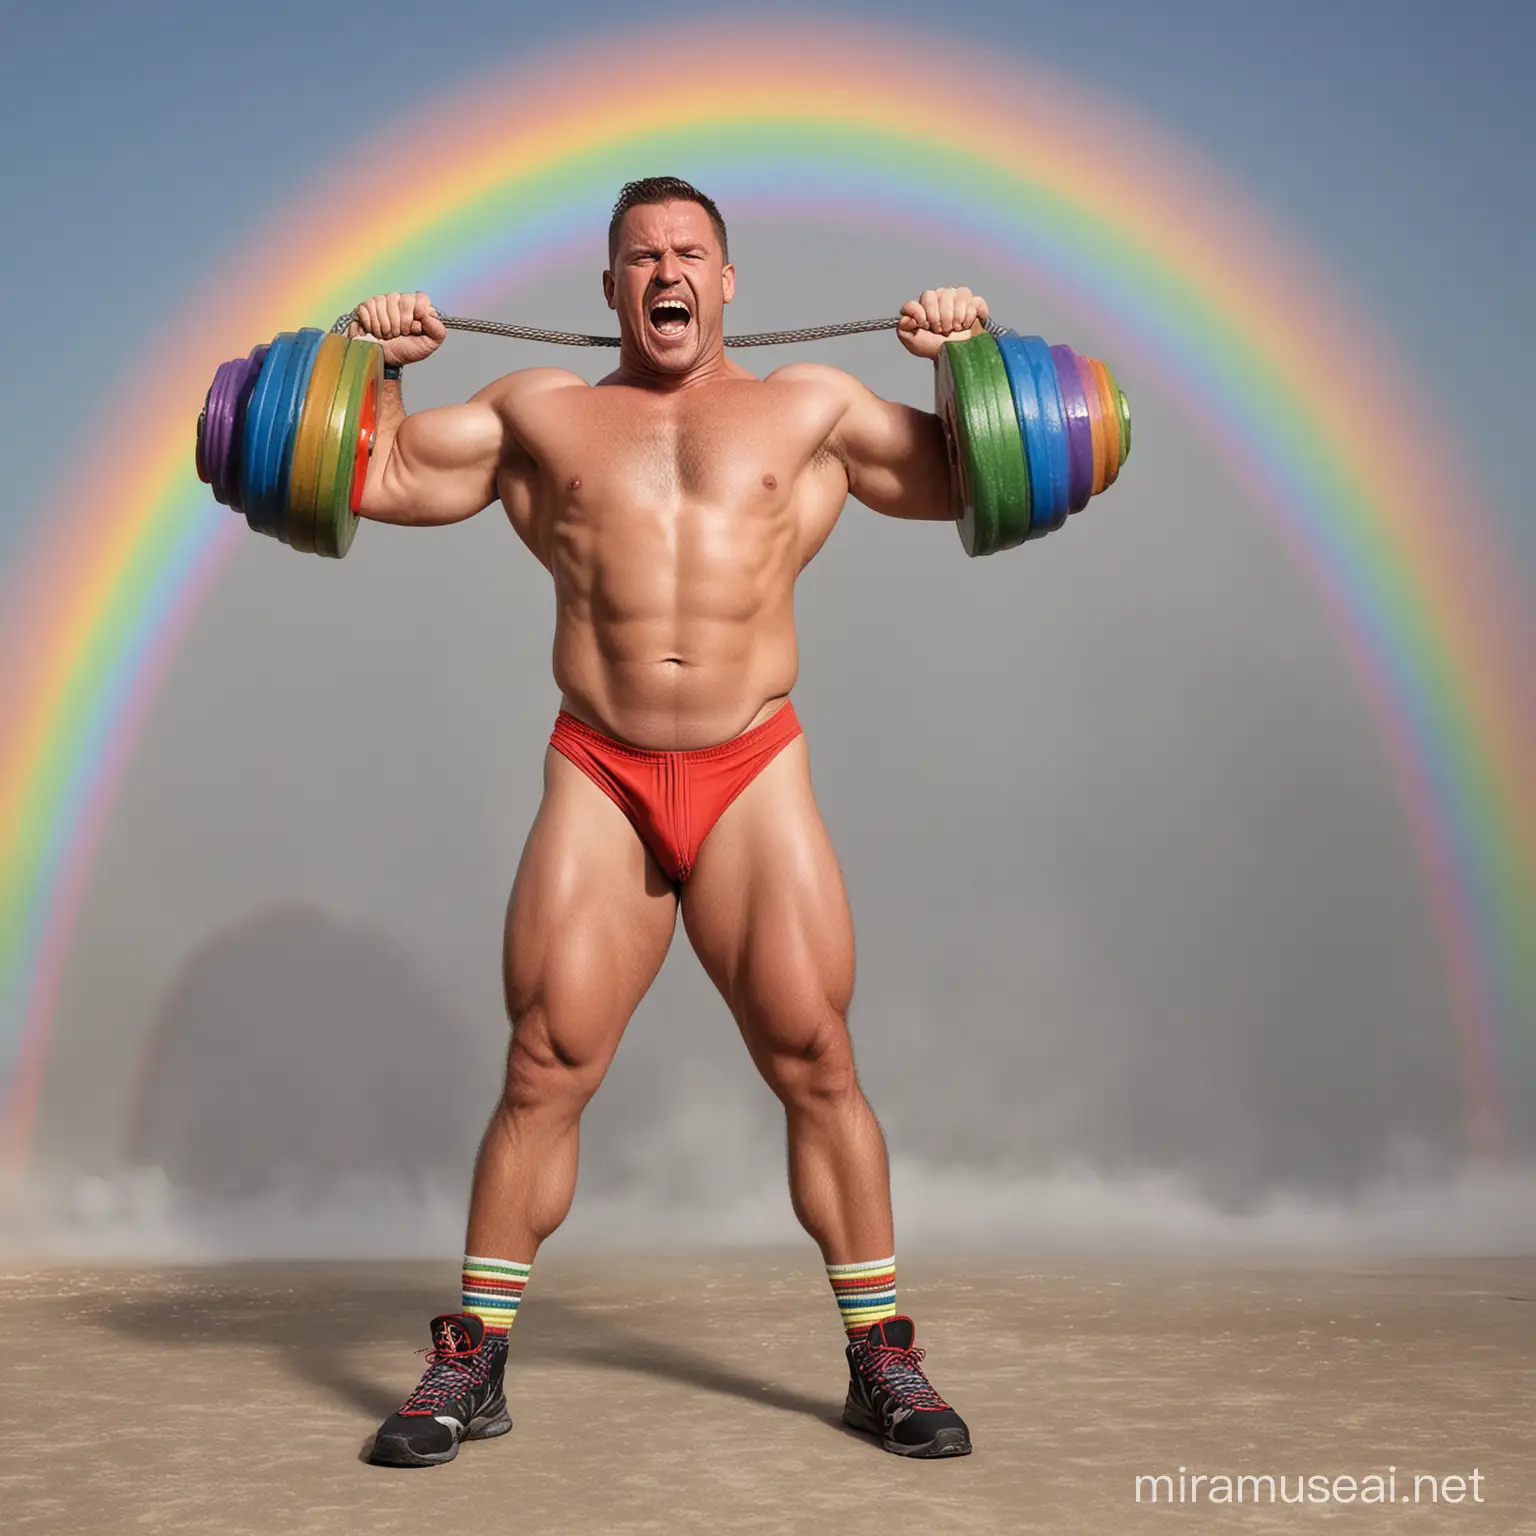 Ultra Muscular Worlds Strongest Man Exercising with Rainbow Colored Weights